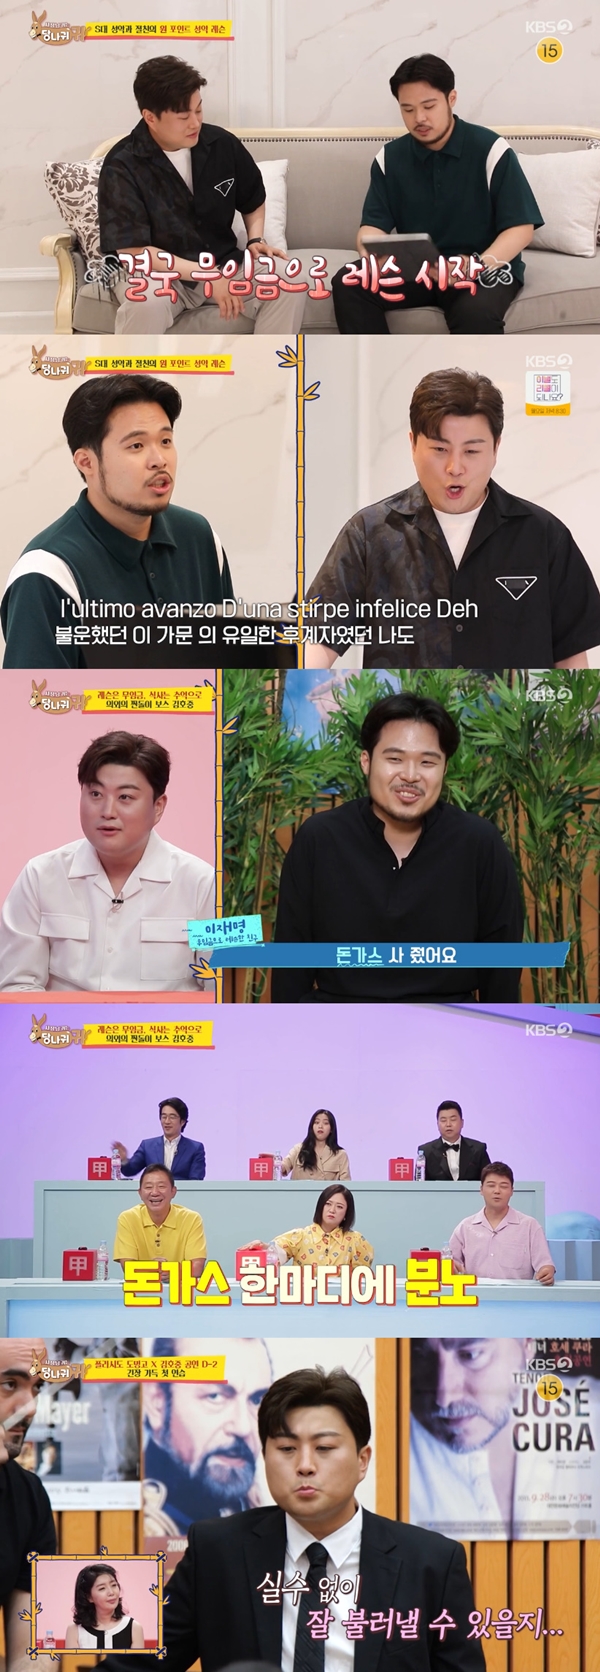 Kim Ho-joong joined KBS 2TV Boss in the Mirror (hereinafter referred to as The Ass ear) on the 17th as the new boss.Kim Ho-joong said, I have never heard of being in a bad life.Everyone who came out first said that, and I know that you are not in a hurry, said Yeo Esther.But Kim Ho-joong laughed, saying, I have nothing really cramped.Kim Ho-joong has turned into a trot singer and caused syndrome while walking the path of Vocal music as a tenor.After the cancellation in June, he returned to Vocal Music, especially the worlds three tenors, Placido Domingo, who surprised everyone by revealing that he was performing with Domingo.A picture of Kim Ho-joong in practice has been released.There was a person who came to Kim Ho-joong, Lee Jae-myung, a 15-year-old friend and Vocal musicist.In particular, he was the actual protagonist of Kang So-ra in the movie My Paparotti, which is the motif of Kim Ho-joongs real story.Lee Jae-myung said of Kim Ho-joong during his school days, When I went out, Hojung always came first and I came second, so I do not have the first title.Kim Ho-joong also said of Lee Jae-myung, Friend who helped me to come up to this position.Kim Ho-joong revealed he had received a lot of checks at the time of sweeping 9M113 Konkurs.Kim Ho-joong said, The accompanist said that the score was missing at the last practice time before entering 9M113 Konkurs.In fact, it was found in Waste container in front of the retroom, he said. This is really a true story. Kim Ho-joong was helped by Friend Lee Jae-myung a week before the performance with Placido Domingo.Because of the change in vocalization as he turned to trot singer, he practiced again from vocalization with the help of Lee Jae-myung.Kim Ho-joong prepared only his own coffee, and Friends drink was not prepared separately, so he heard the MCs voice.In addition to this, I surprised everyone by revealing that I did not pay the lesson fee to Friend who gave lessons and bought money for meals.Everyone responded that they were too much in the unexpected salty aspect.Meanwhile Kim Ho-joong attended a group exercise two days before the performance with Lee Jae-myung.Kim Ho-joong went into practice full of tension, making mistakes, including completing his breathing before the conductor finished the song.Photo KBS 2TV broadcast screen capture